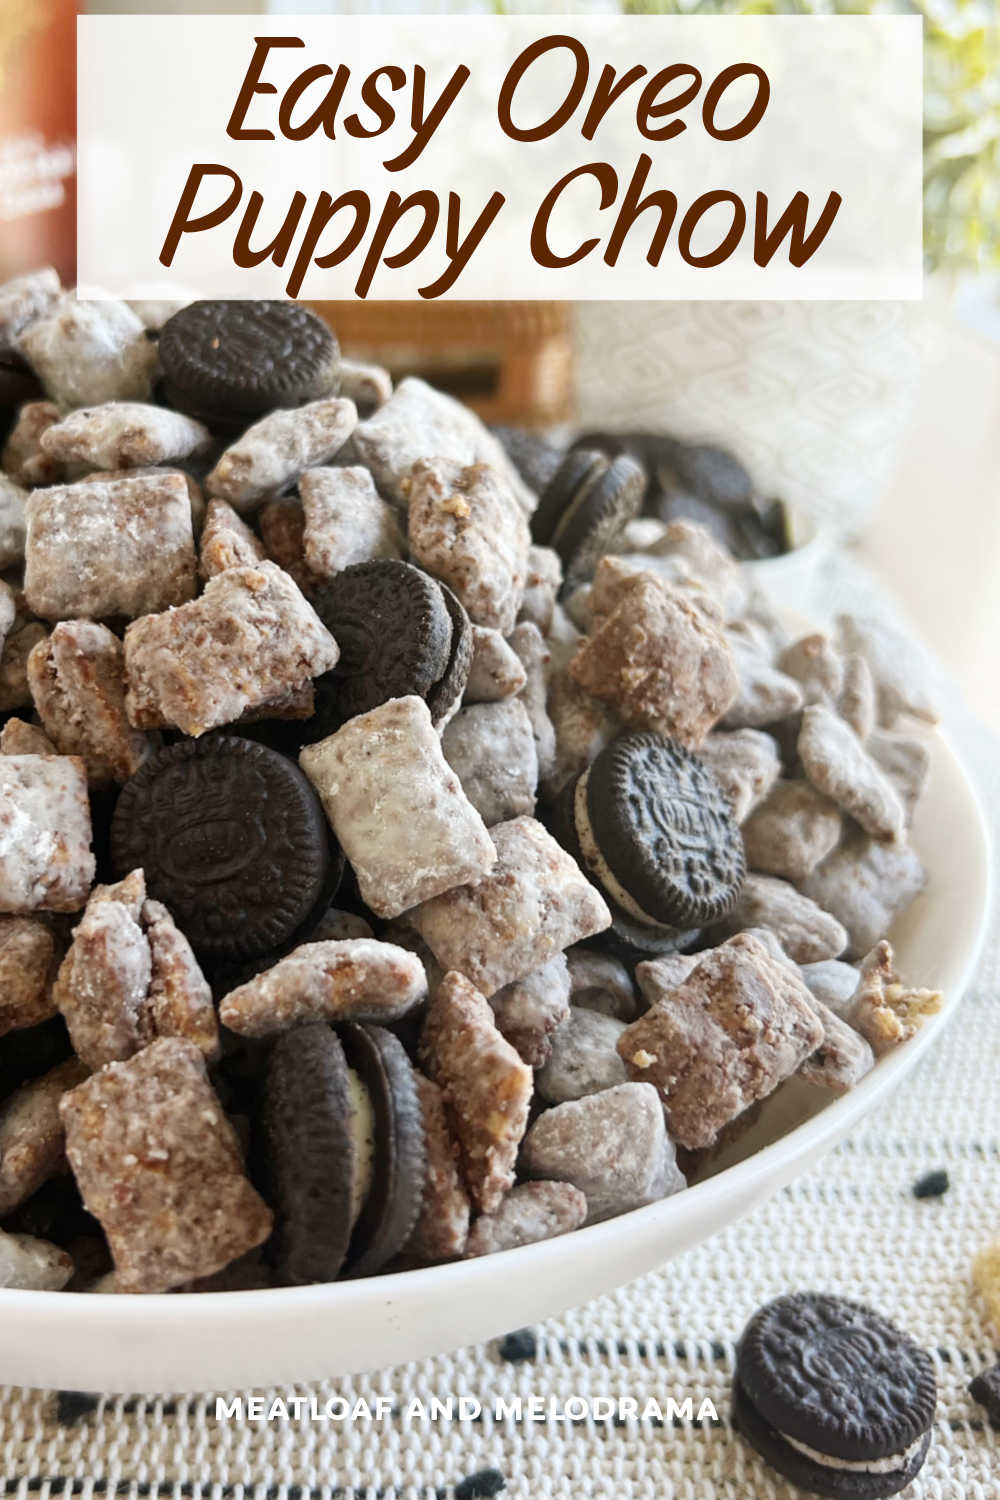 Easy OREO Puppy Chow (Muddy Buddies) made with Chex cereal, peanut butter, chocolate, powdered sugar and Oreo cookies is a delicious sweet salty snack for humans. Once you start munching, it's hard to stop! via @meamel